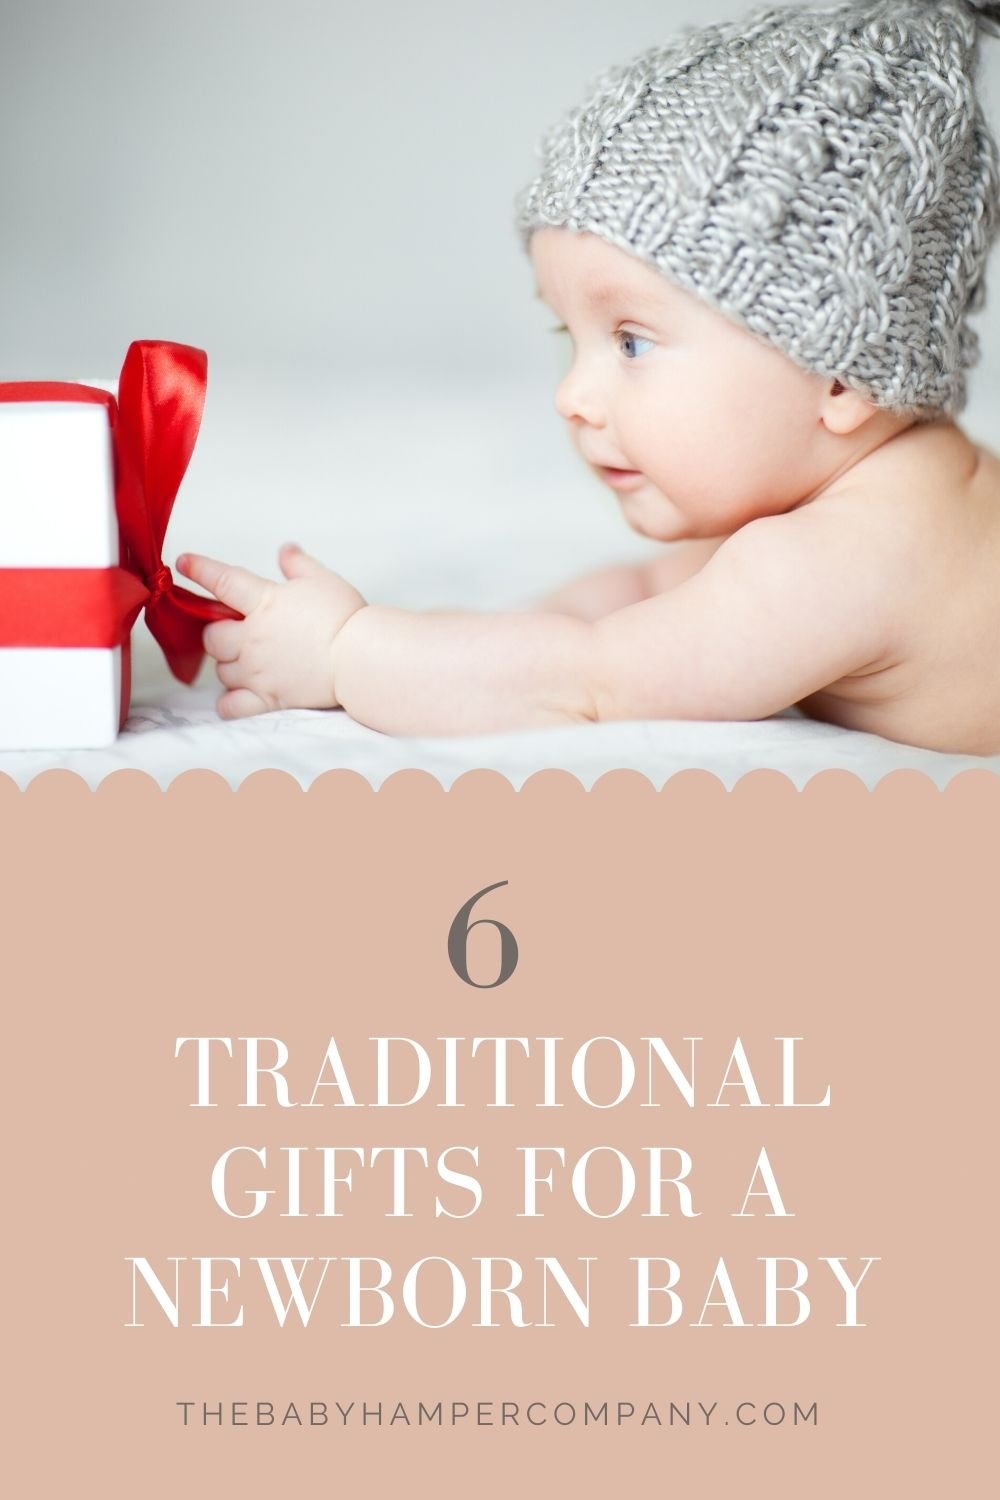 6 Traditional Gifts for a Newborn Baby